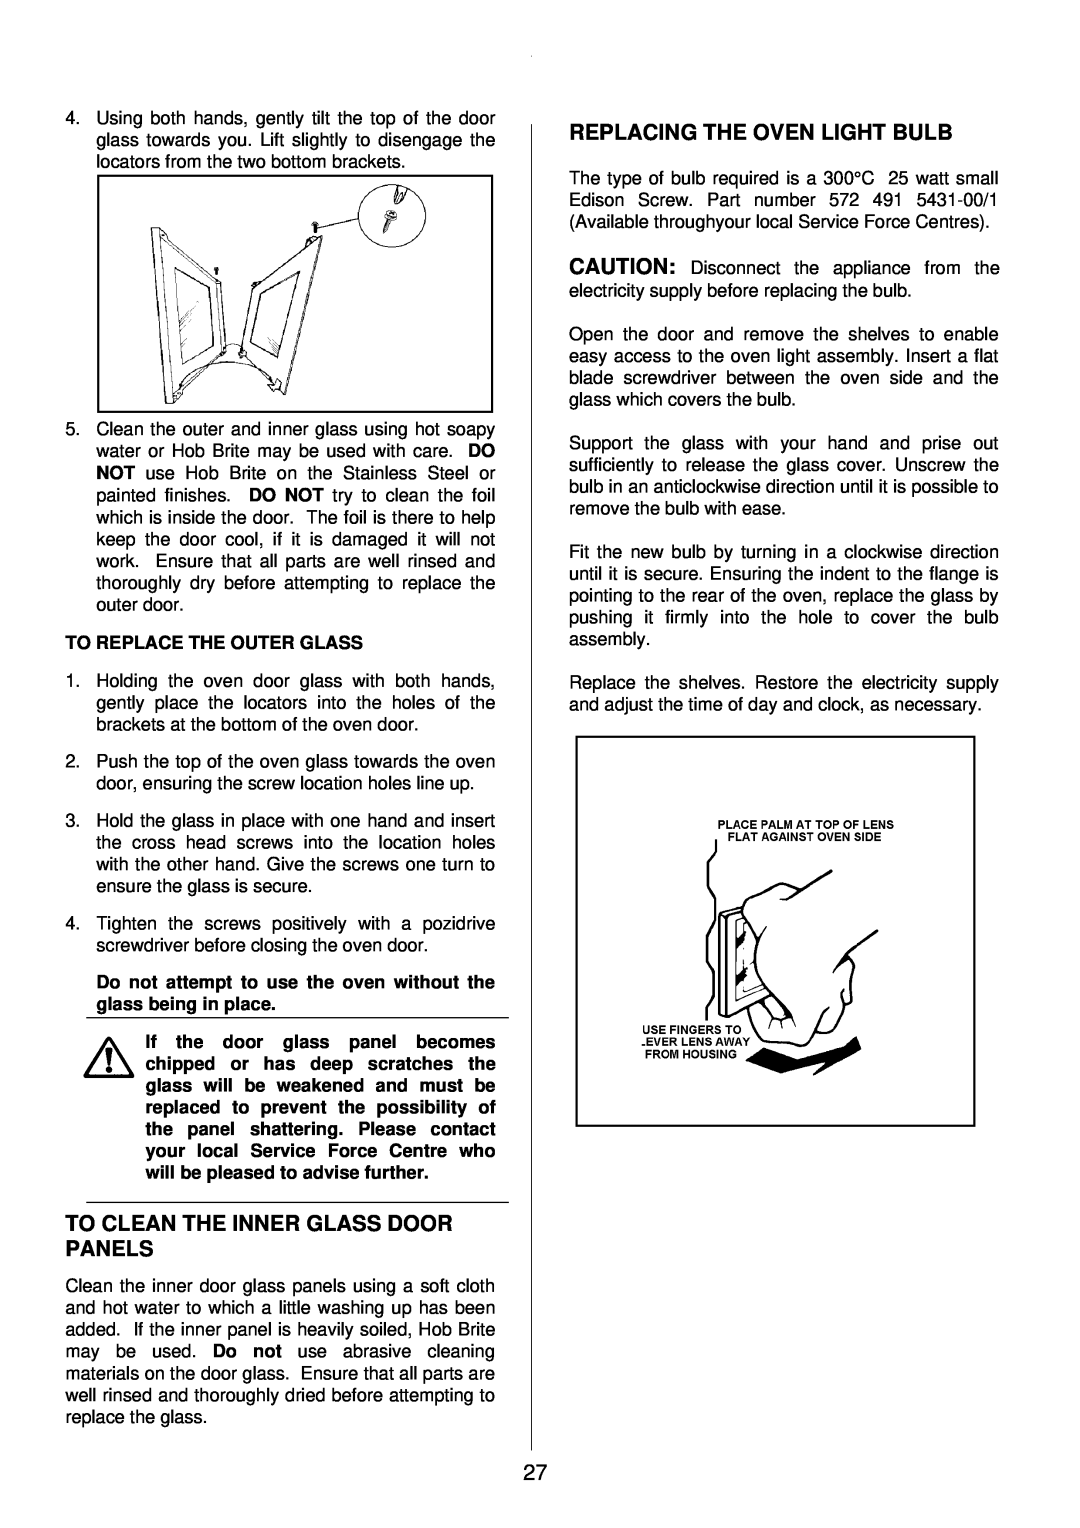 Tricity Bendix SI 453 installation instructions To Clean The Inner Glass Door Panels, Replacing The Oven Light Bulb 